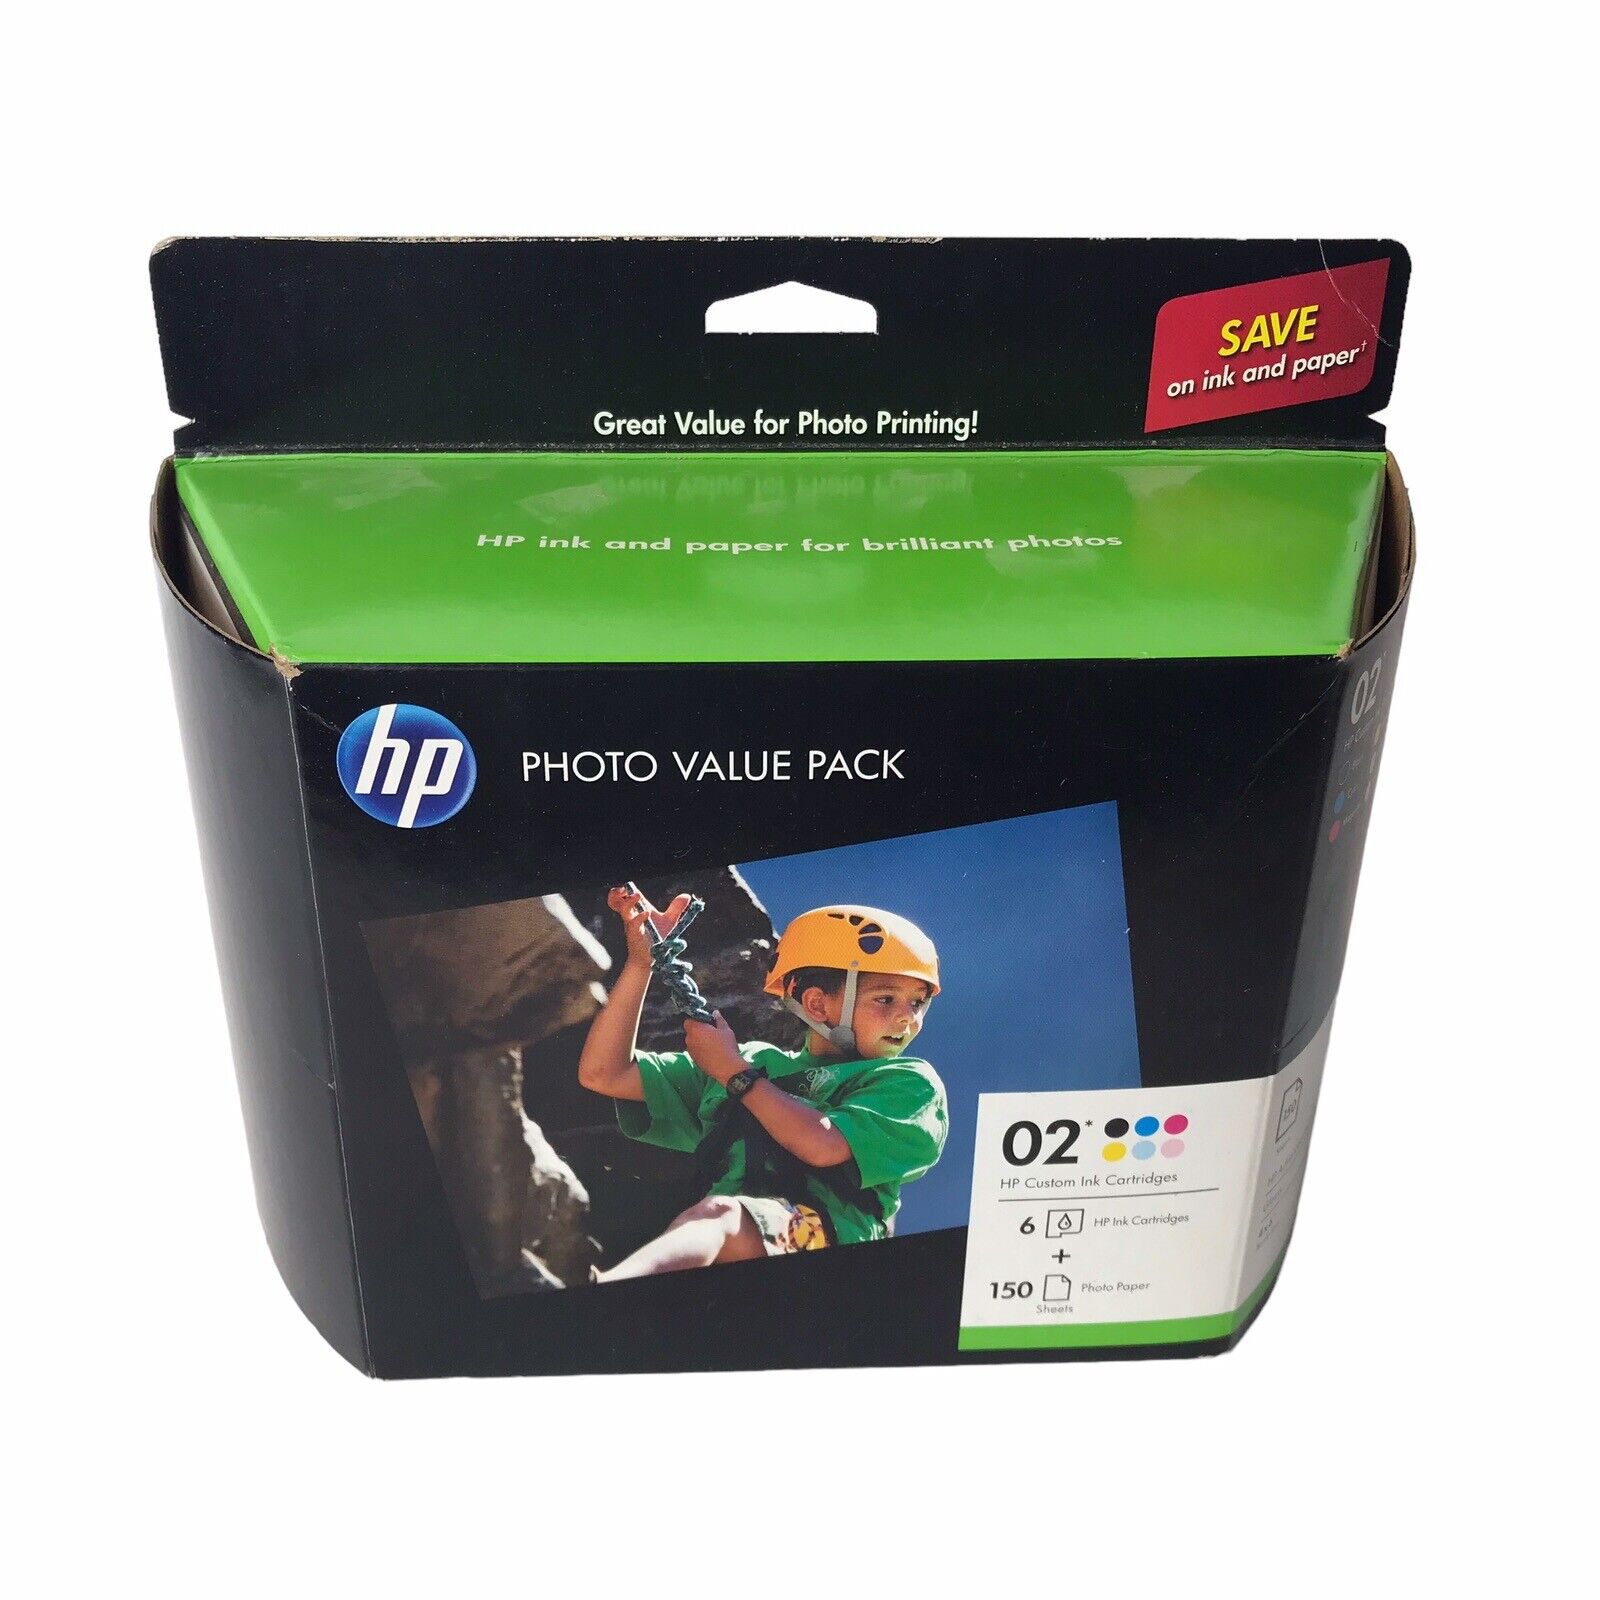 HP 02 Ink Cartridges Combo Pack +150 Sheets Photo Paper EXP 6/2014 NEW Sealed